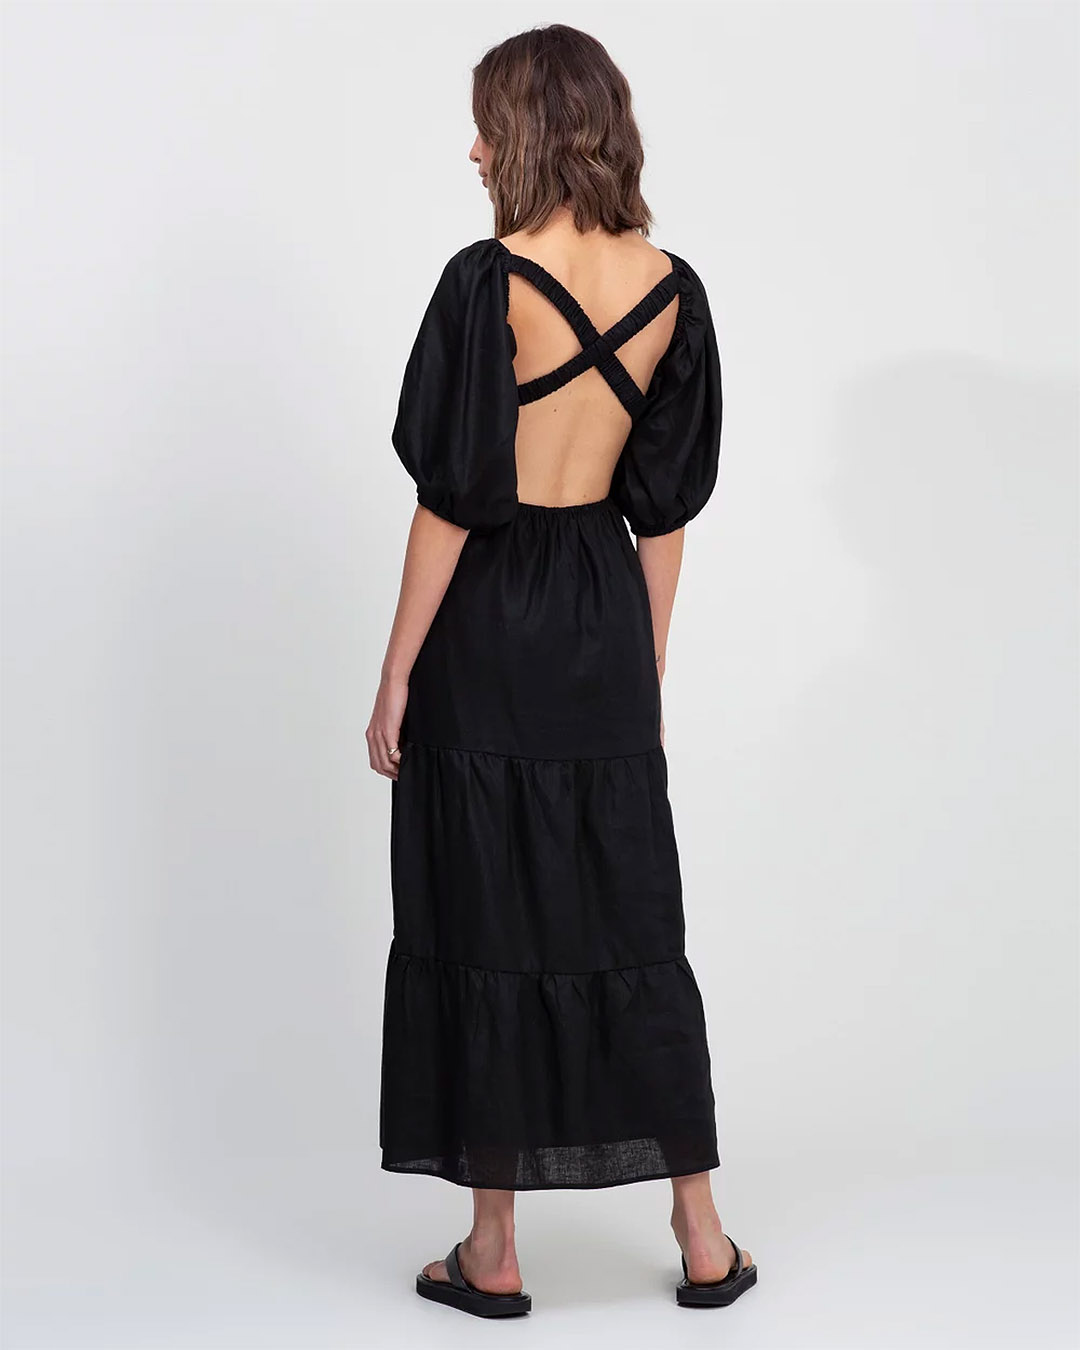 We see the back of a woman’s black dress with balloon sleeves and crossed straps over a back cutout. 